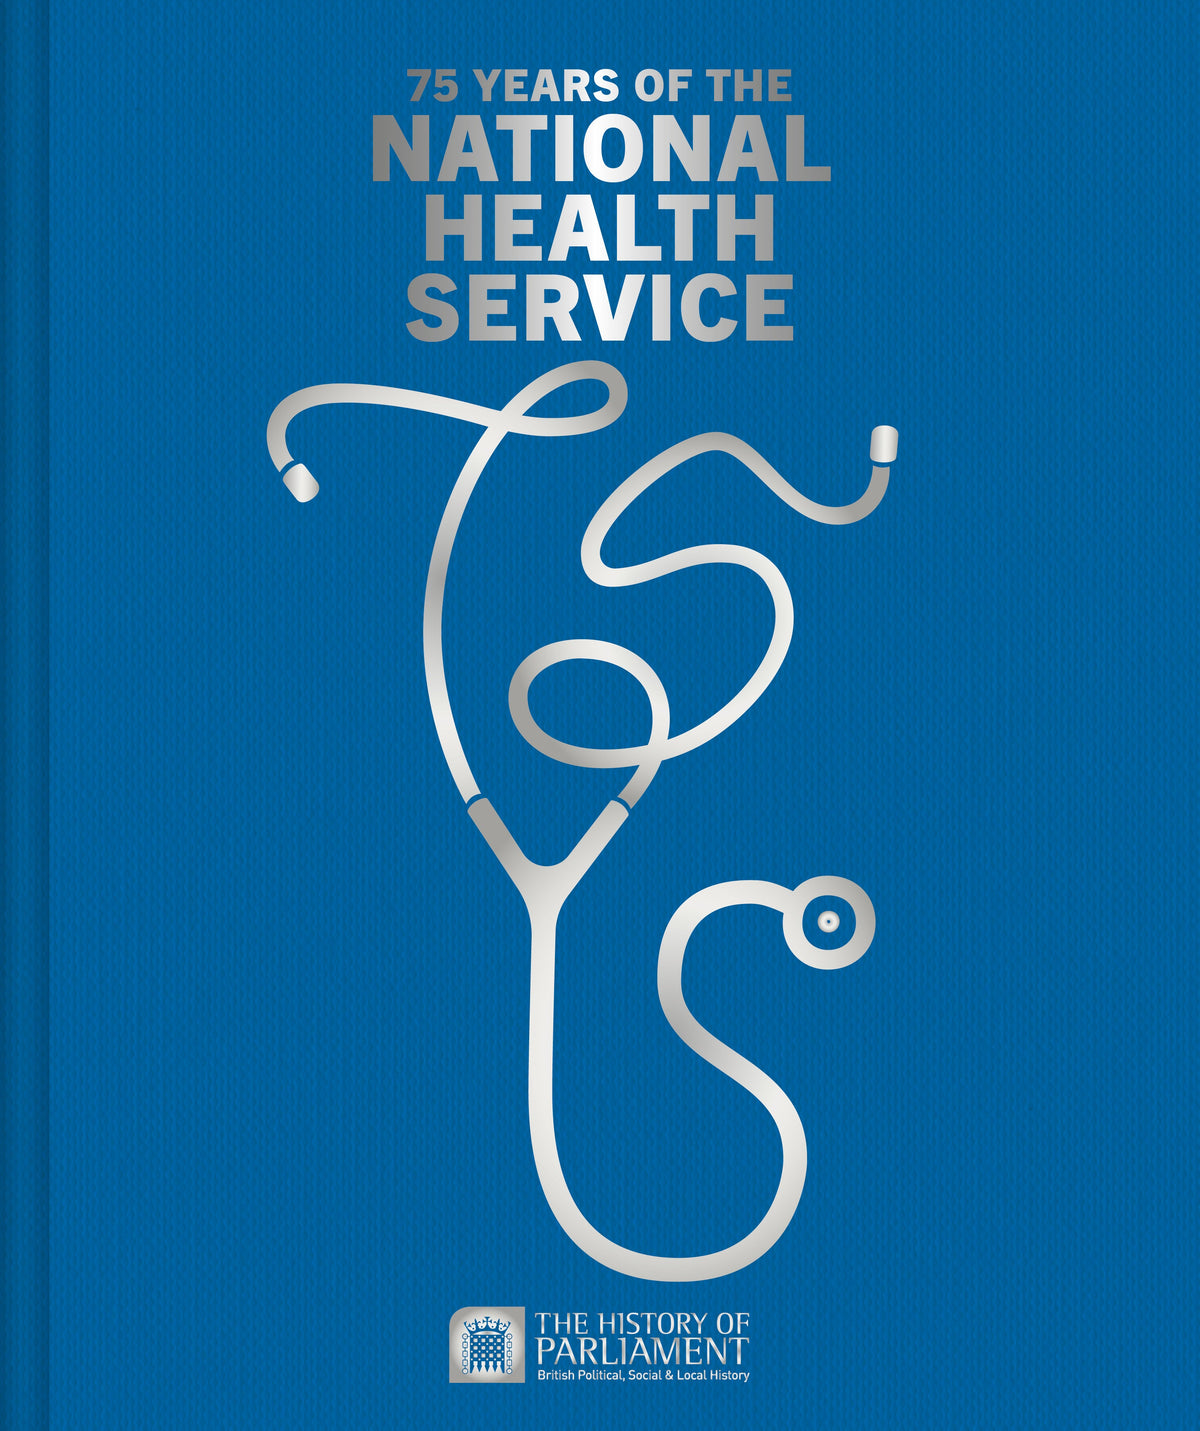 Free book offer: 75 Years of the National Health Service